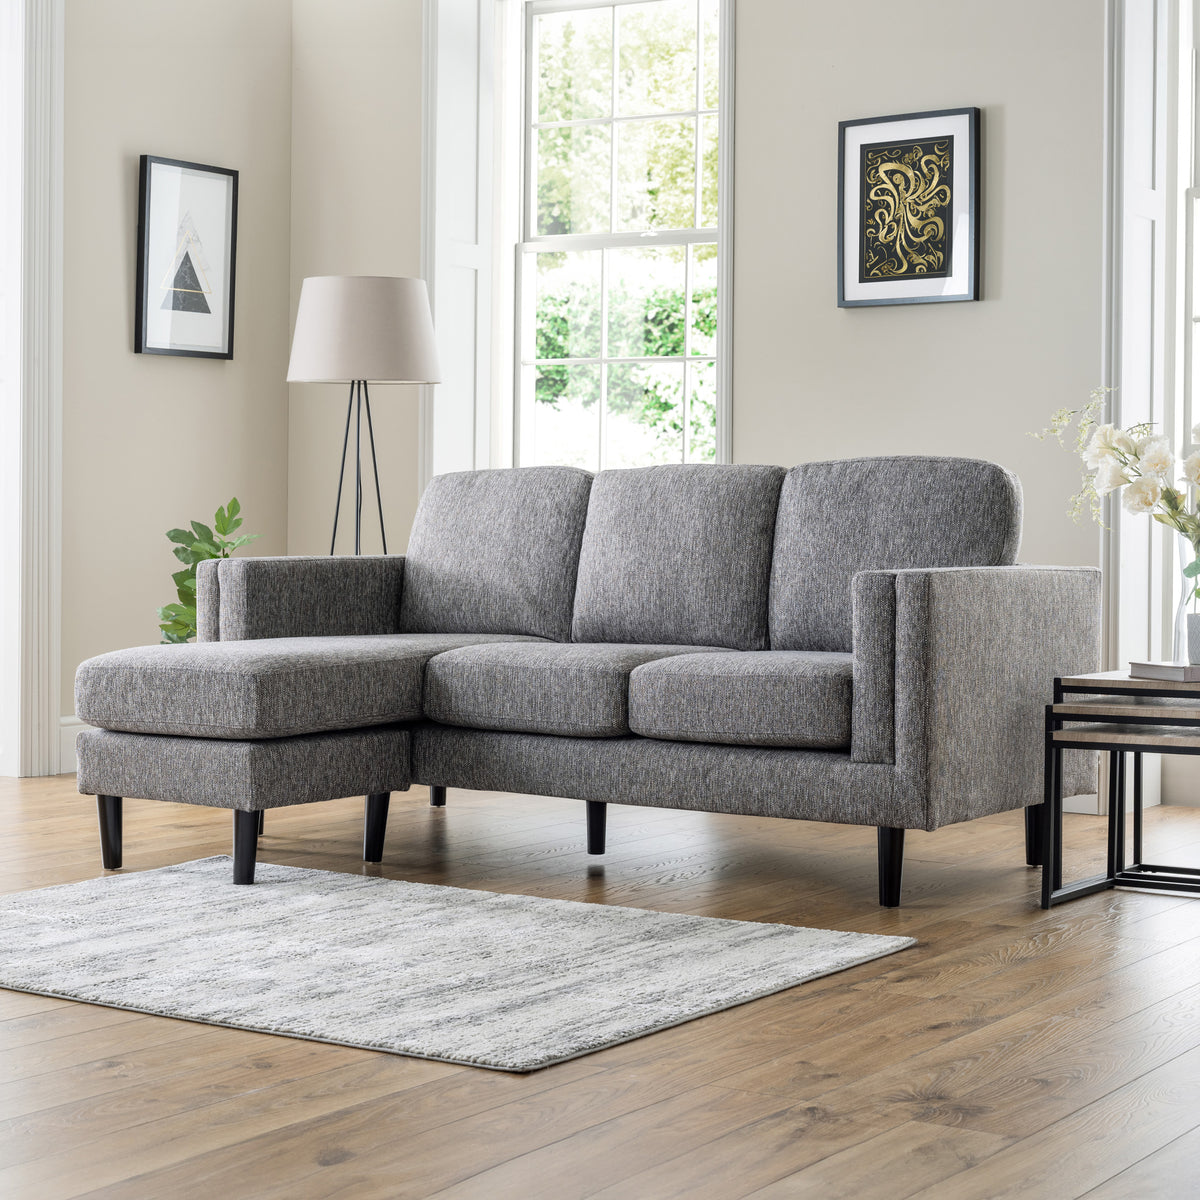 Andre Grey Reversible Chaise Sofa for Living room